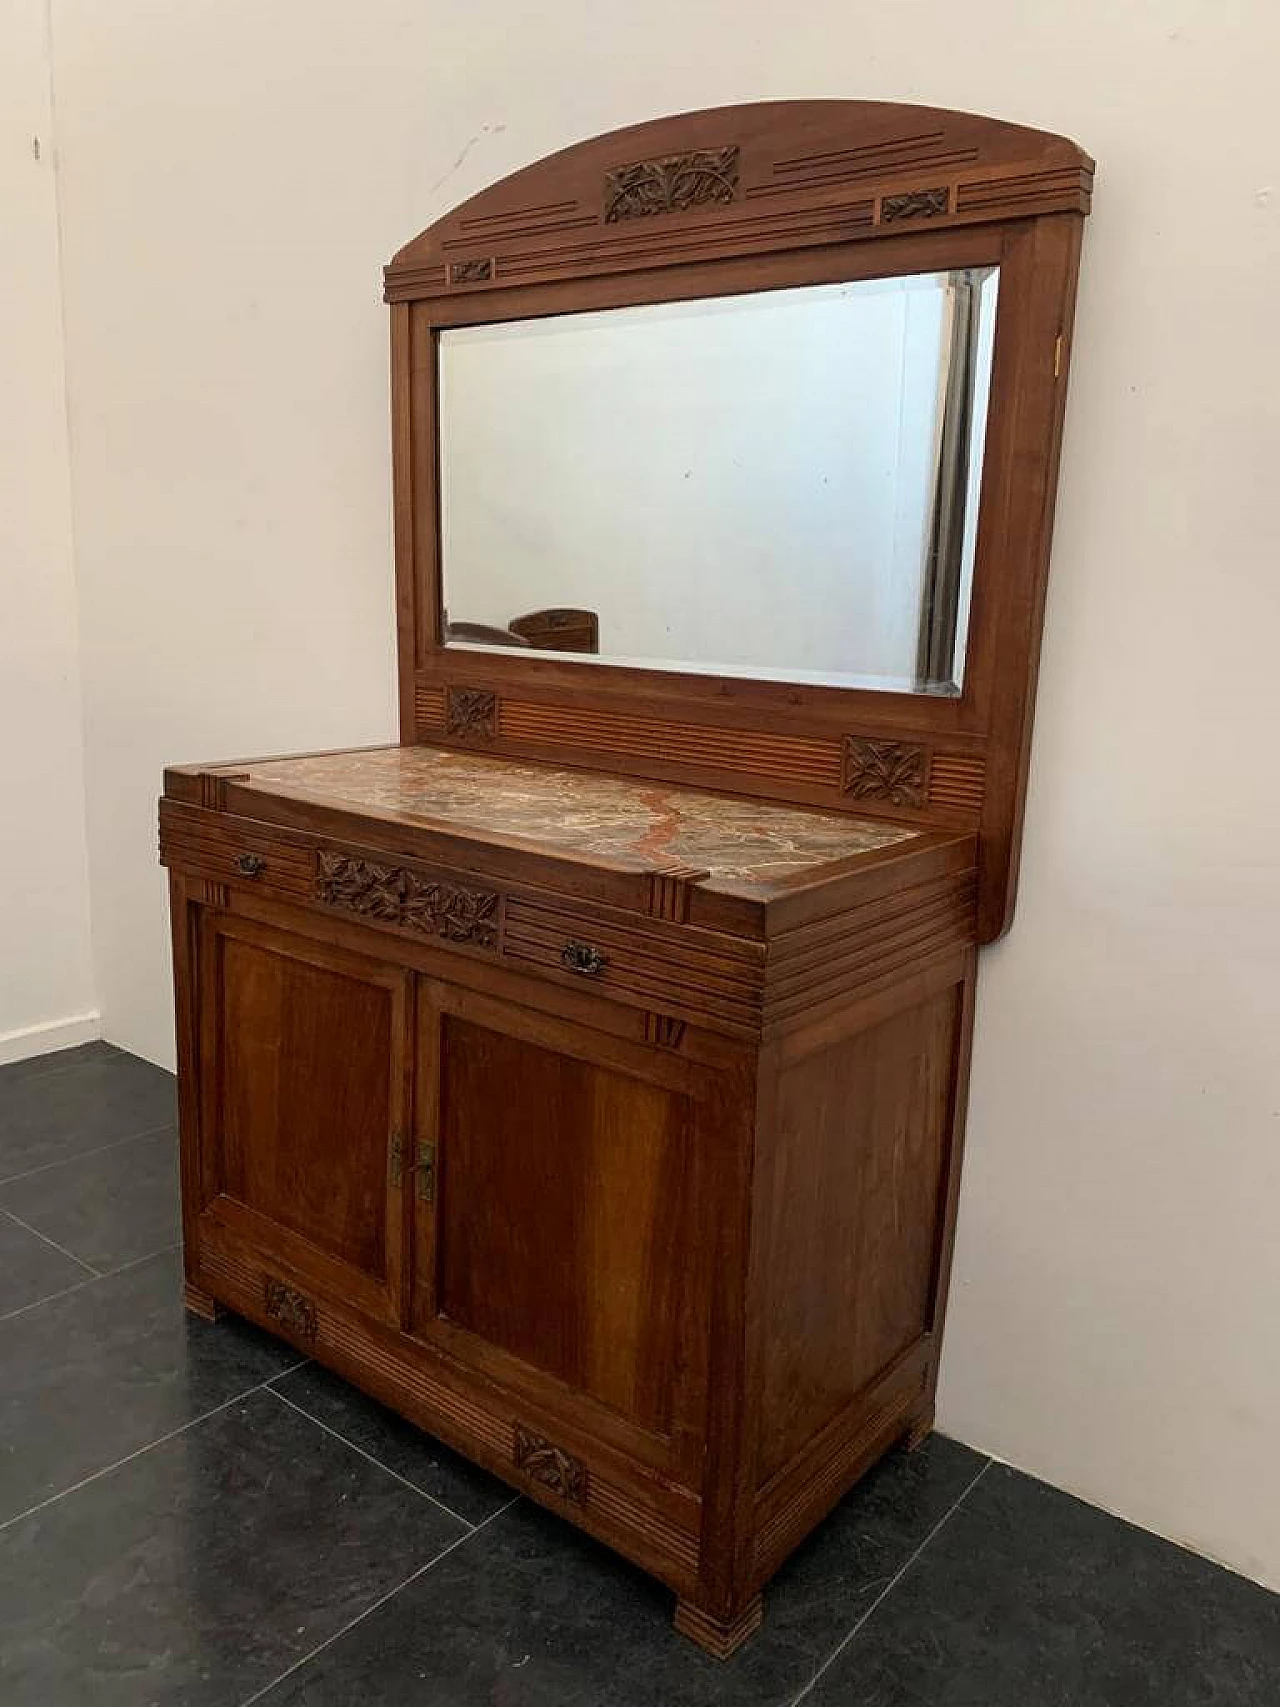 Art Nouveau cherry wood sideboard with mirror, late 19th century 20